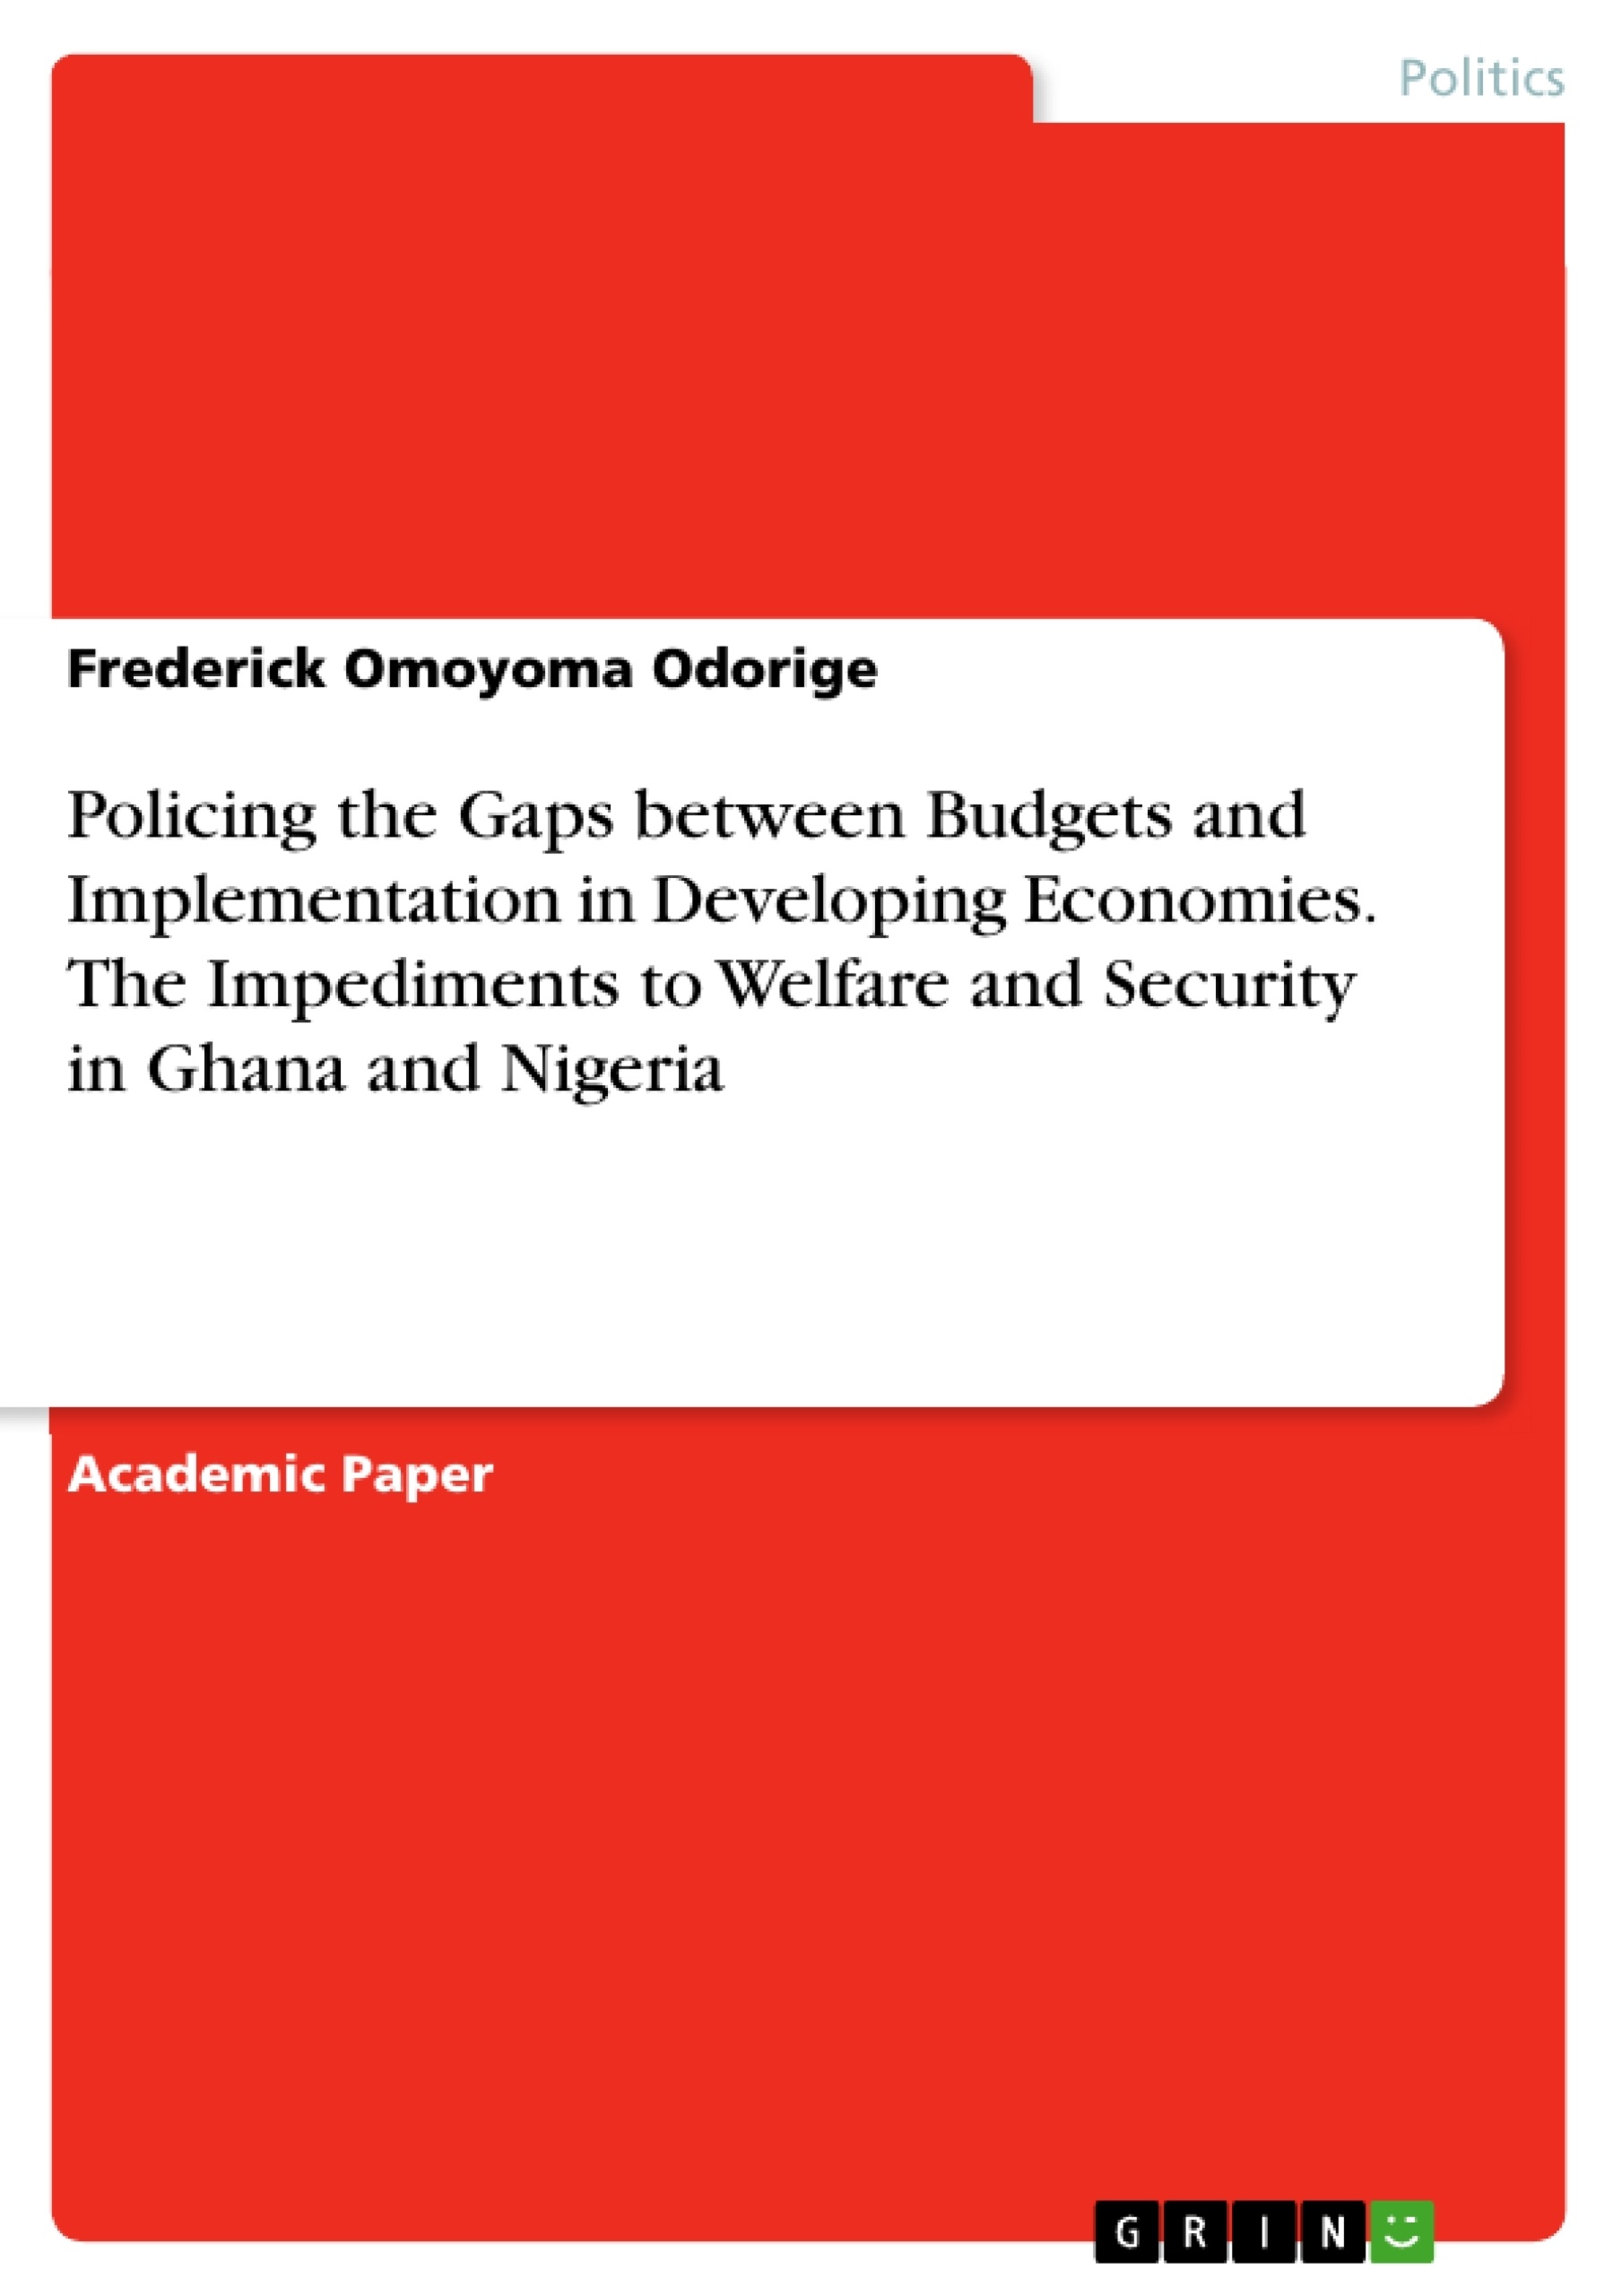 Title: Policing the Gaps between Budgets and Implementation in Developing Economies. The Impediments to Welfare and Security in Ghana and Nigeria